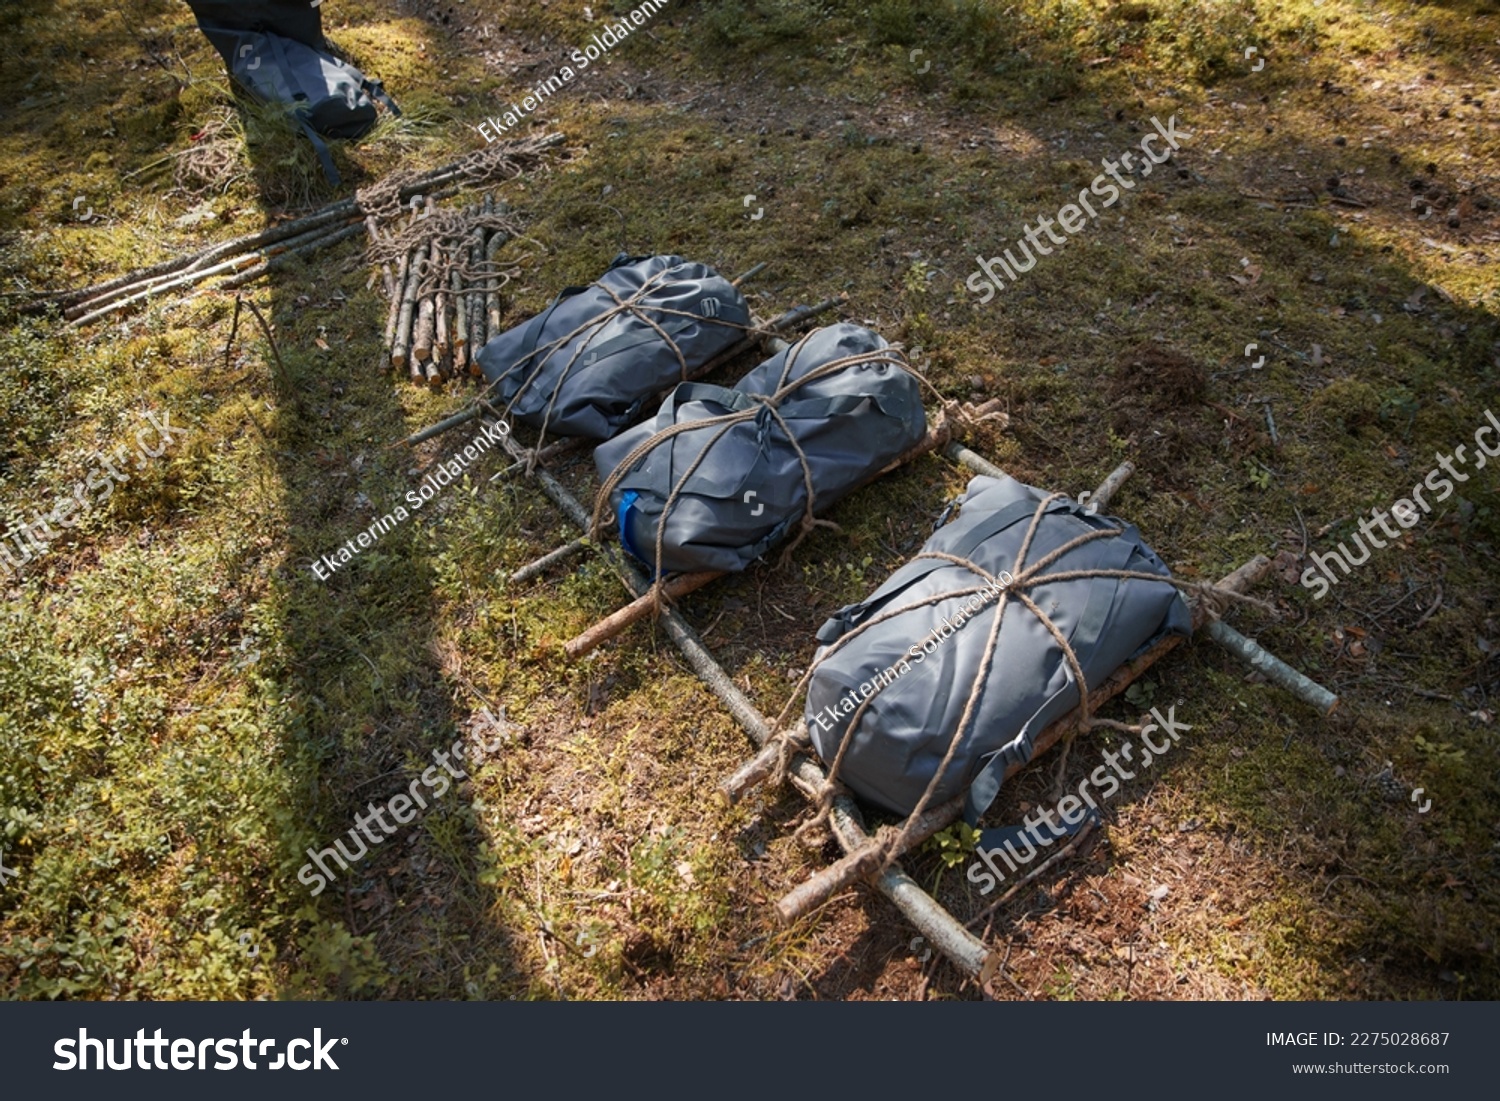 Makeshift stretchers made of small logs and tarpaulins, tied together with a rope, lie on the ground in the forest. Preparing for a hike in the wild. #2275028687